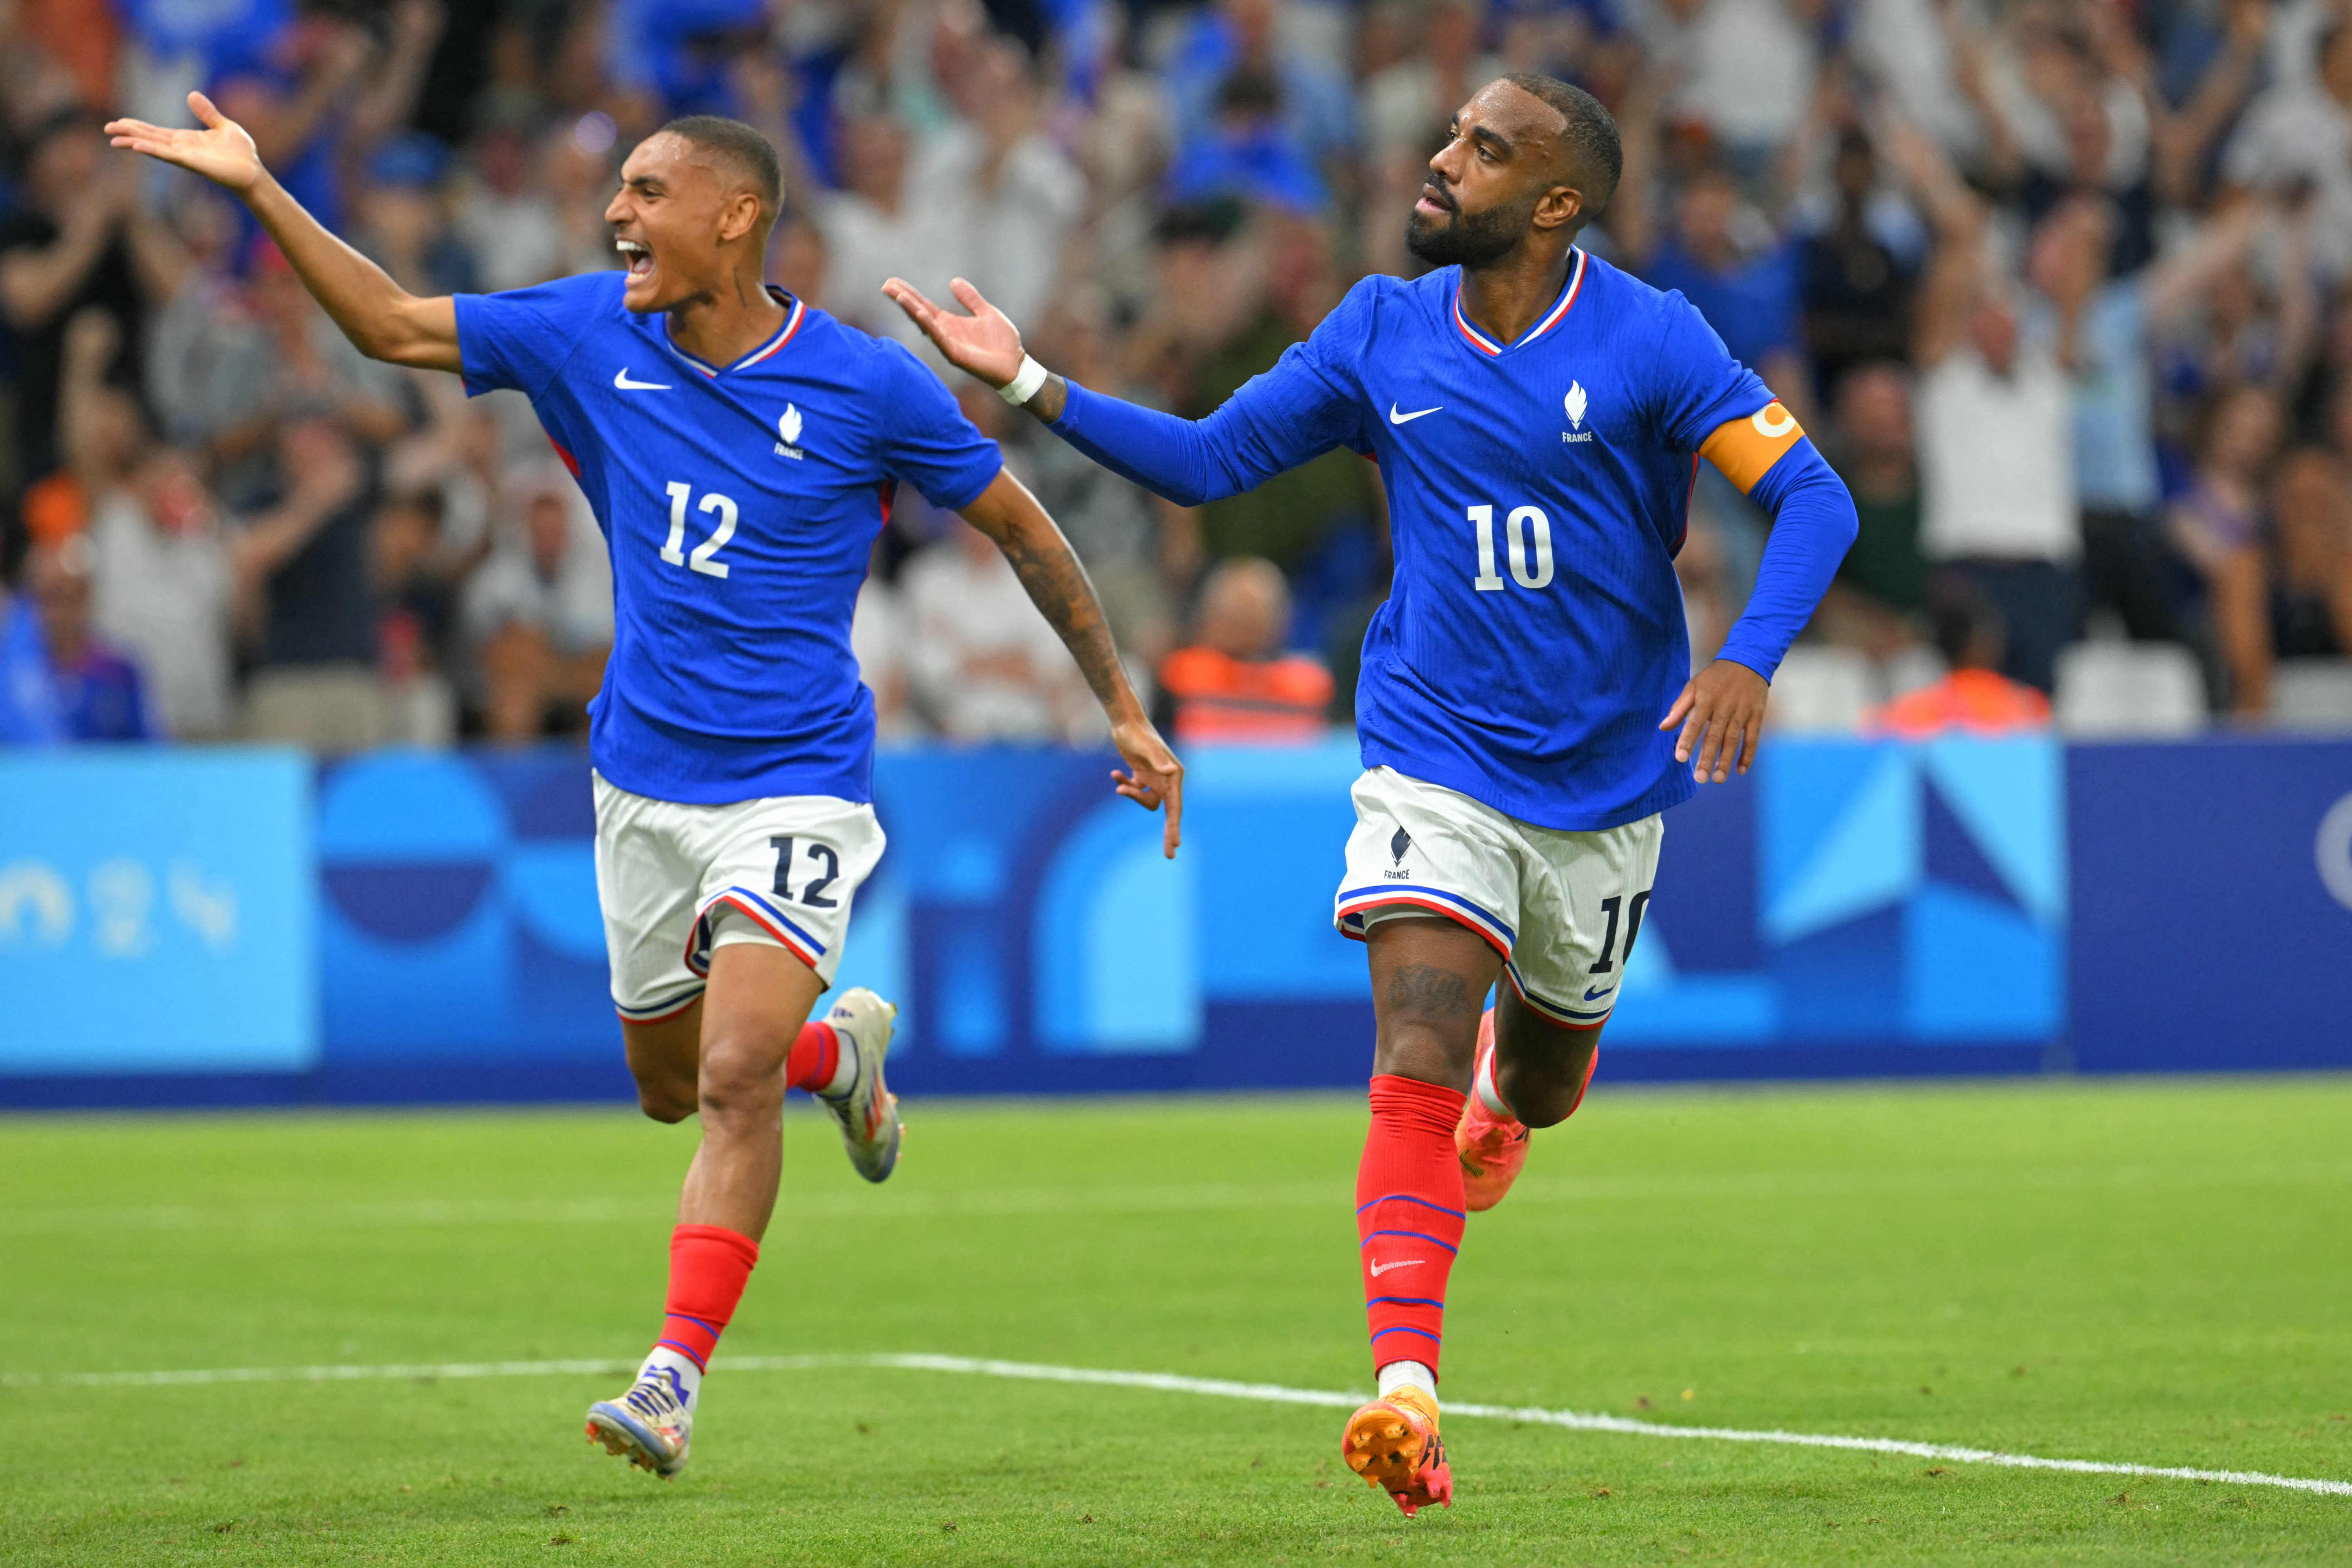 France's Olympics come alive with men's soccer win over U.S.